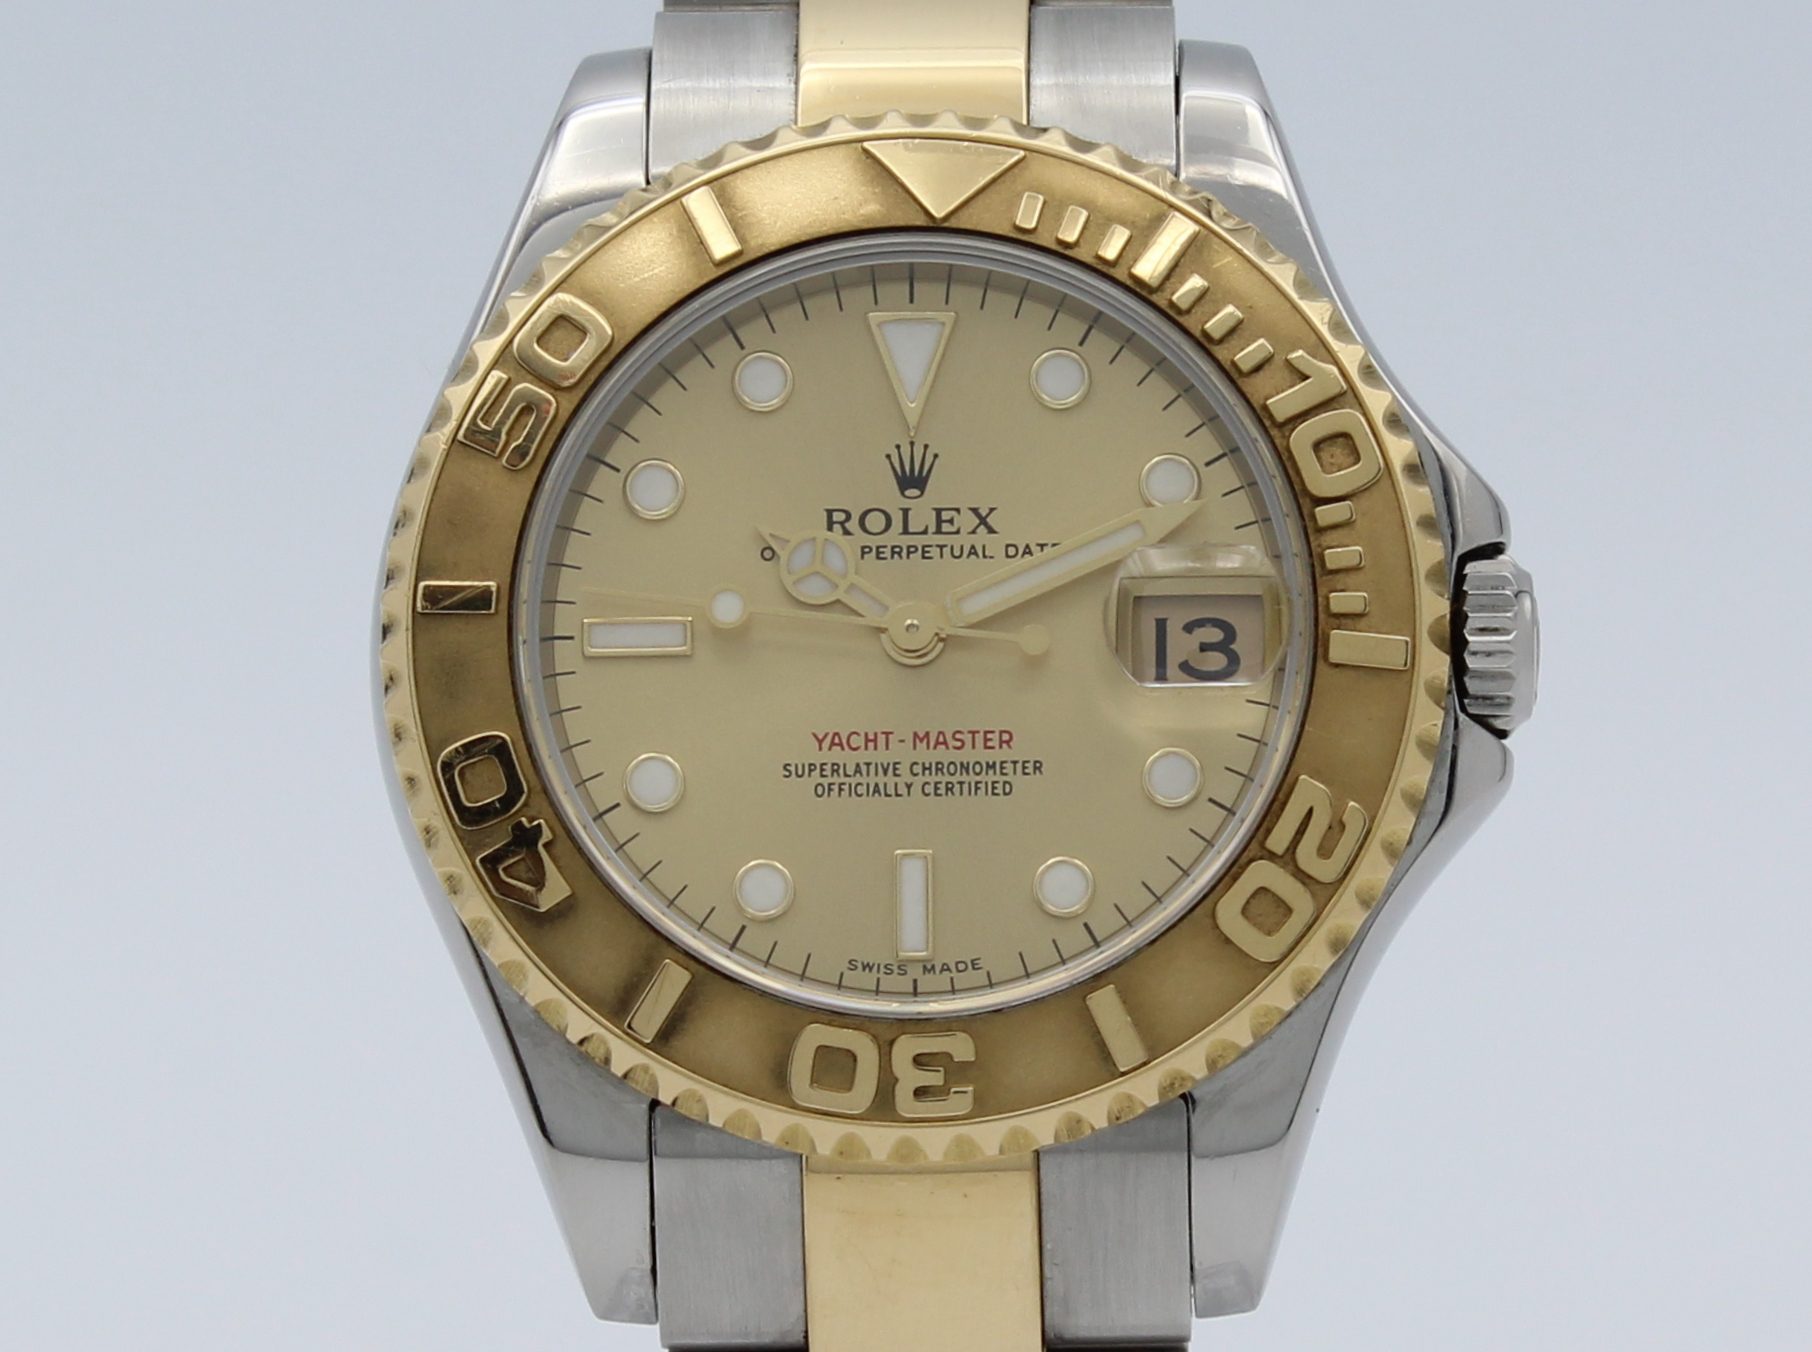 rolex yacht master perpetual date price